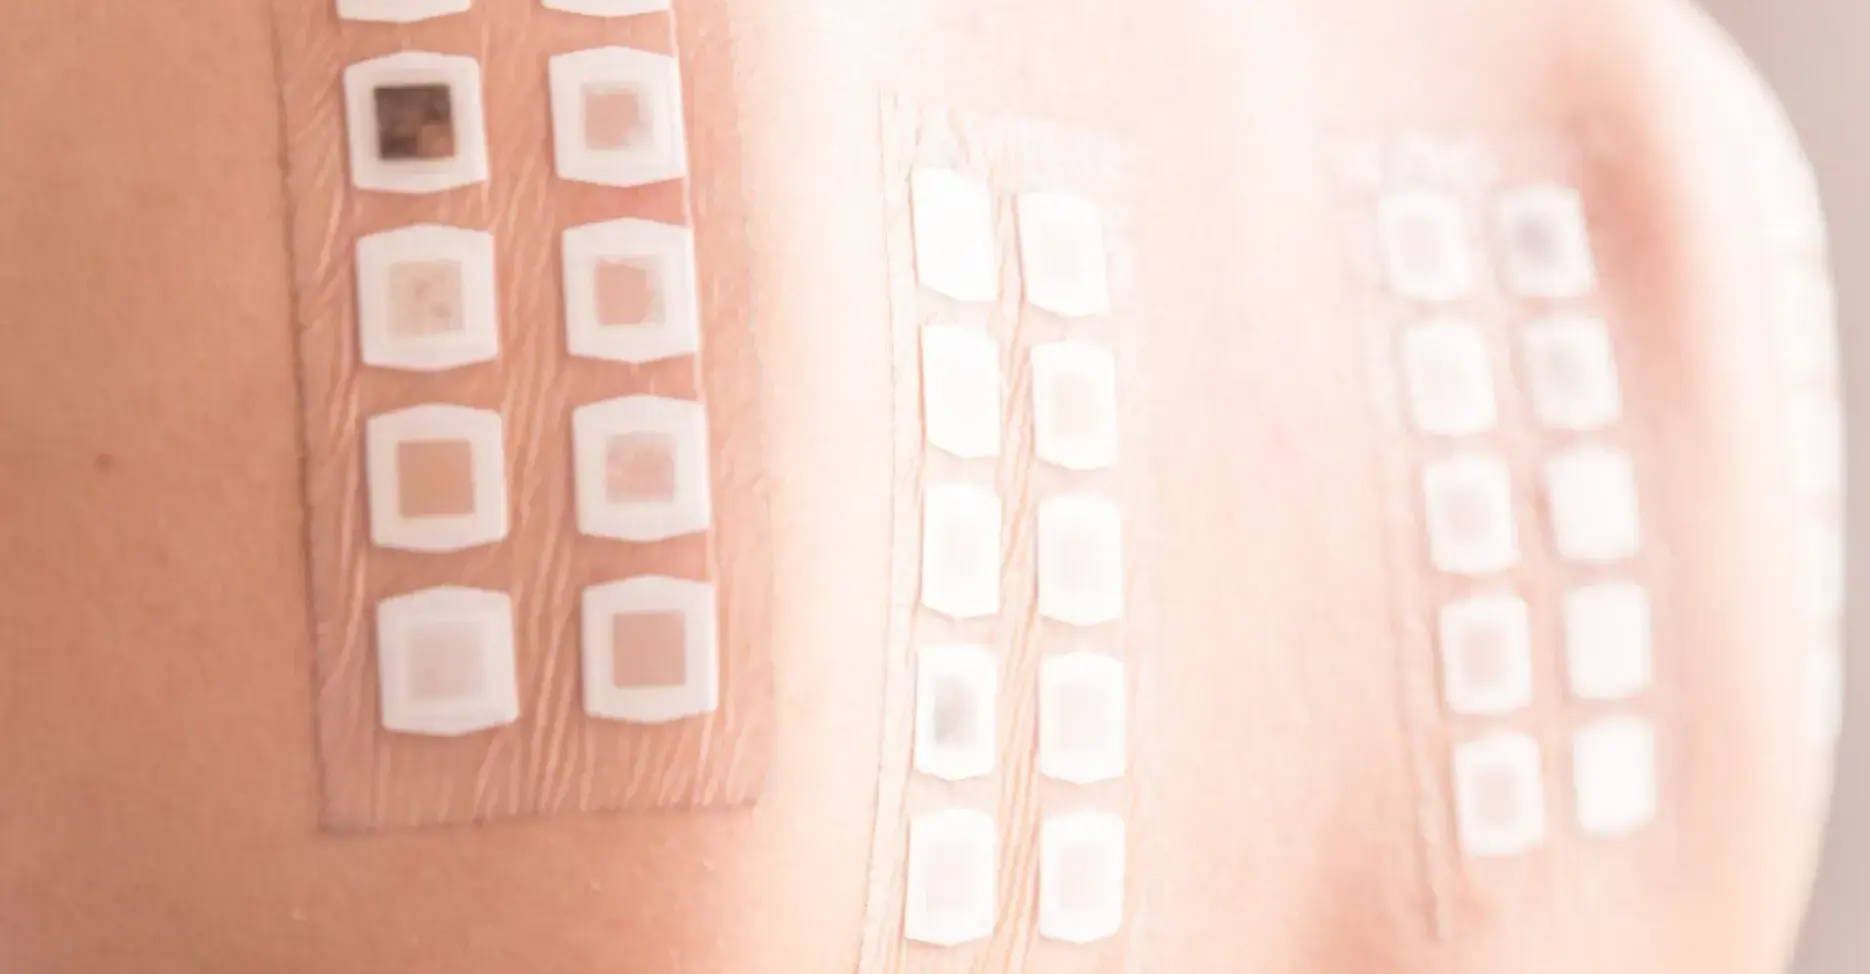 Child having a patch test for contact allergy – there are 3 grids of small white circles taped to their back